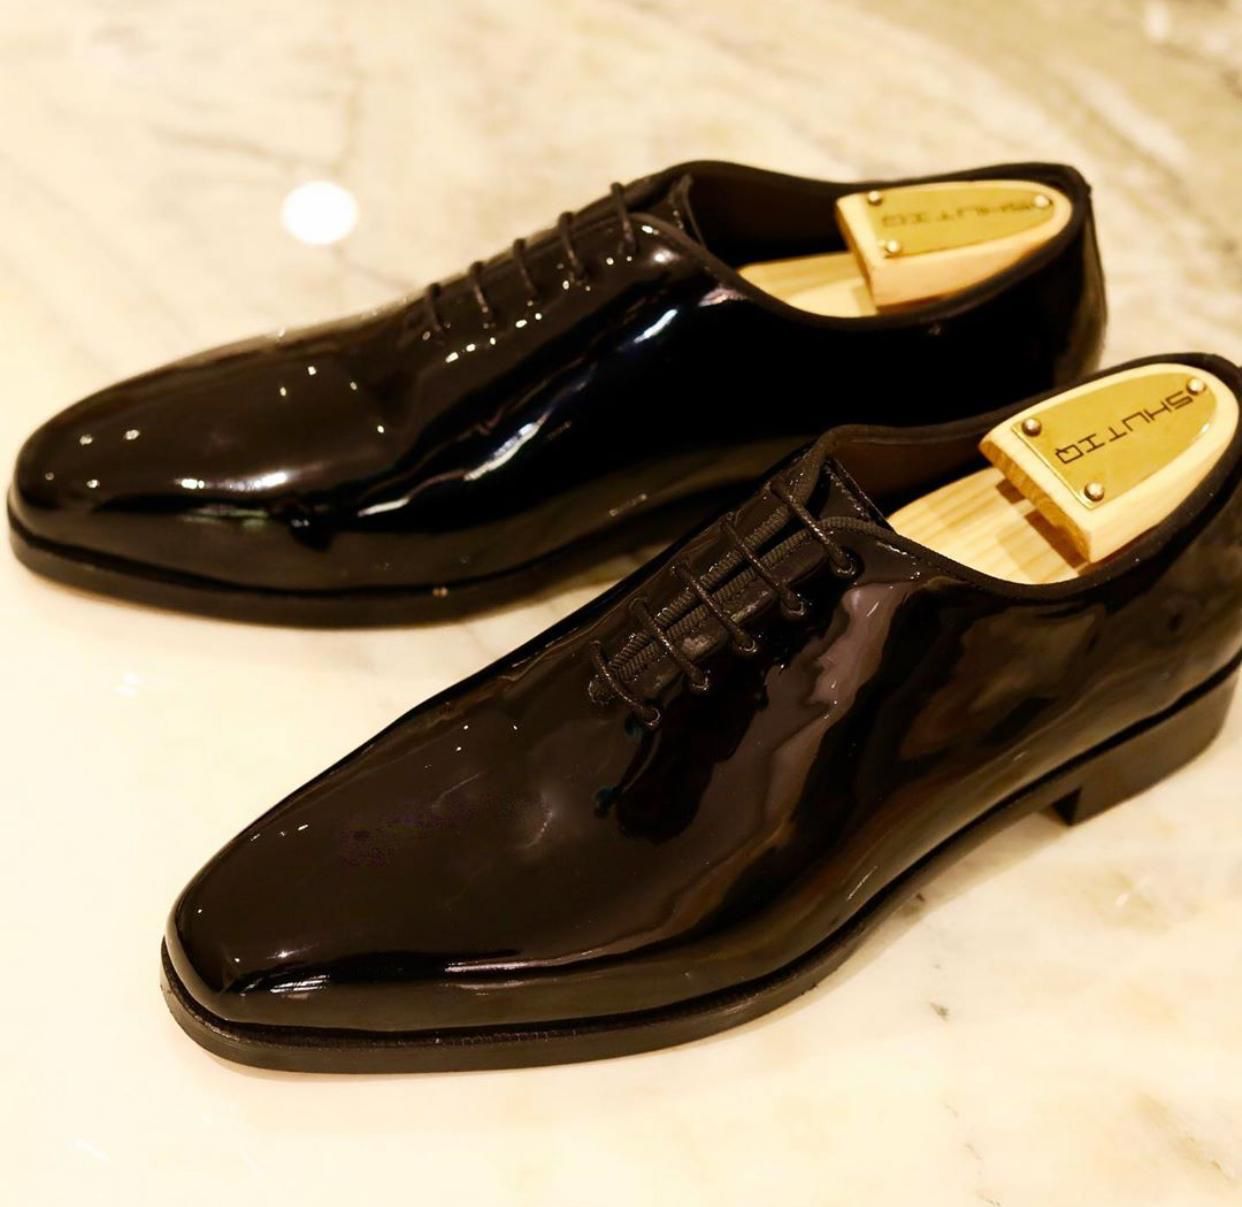 Shiny Oxford Lace-up Shoes Elevate Your Formal Style from Business to Black-Tie - JACKMARC.COM